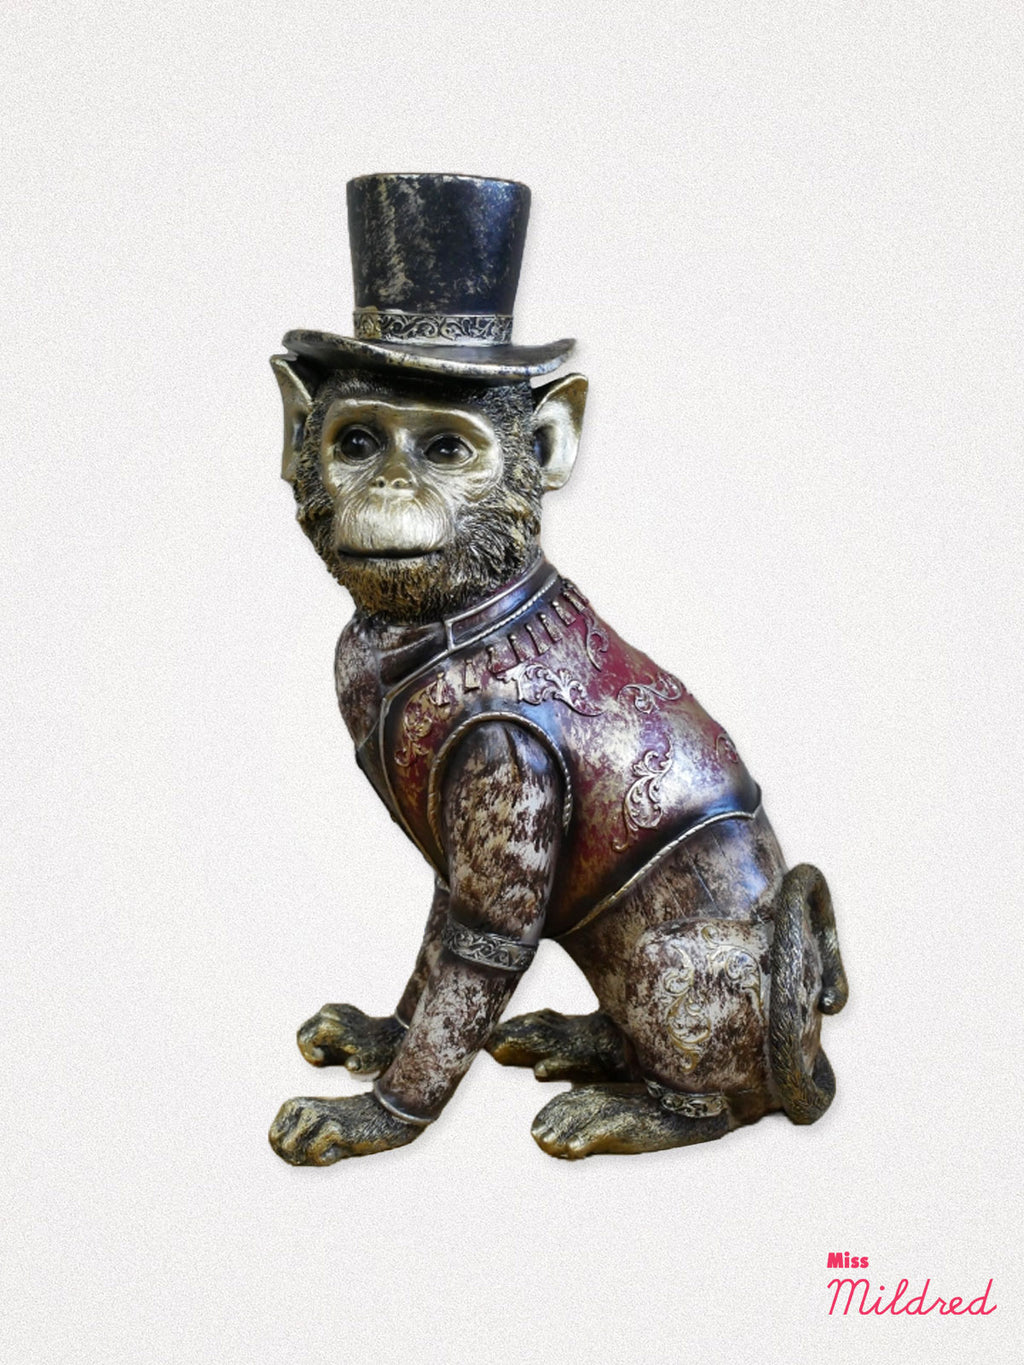 Top Hat Monkey Statue - Bronze and Gold